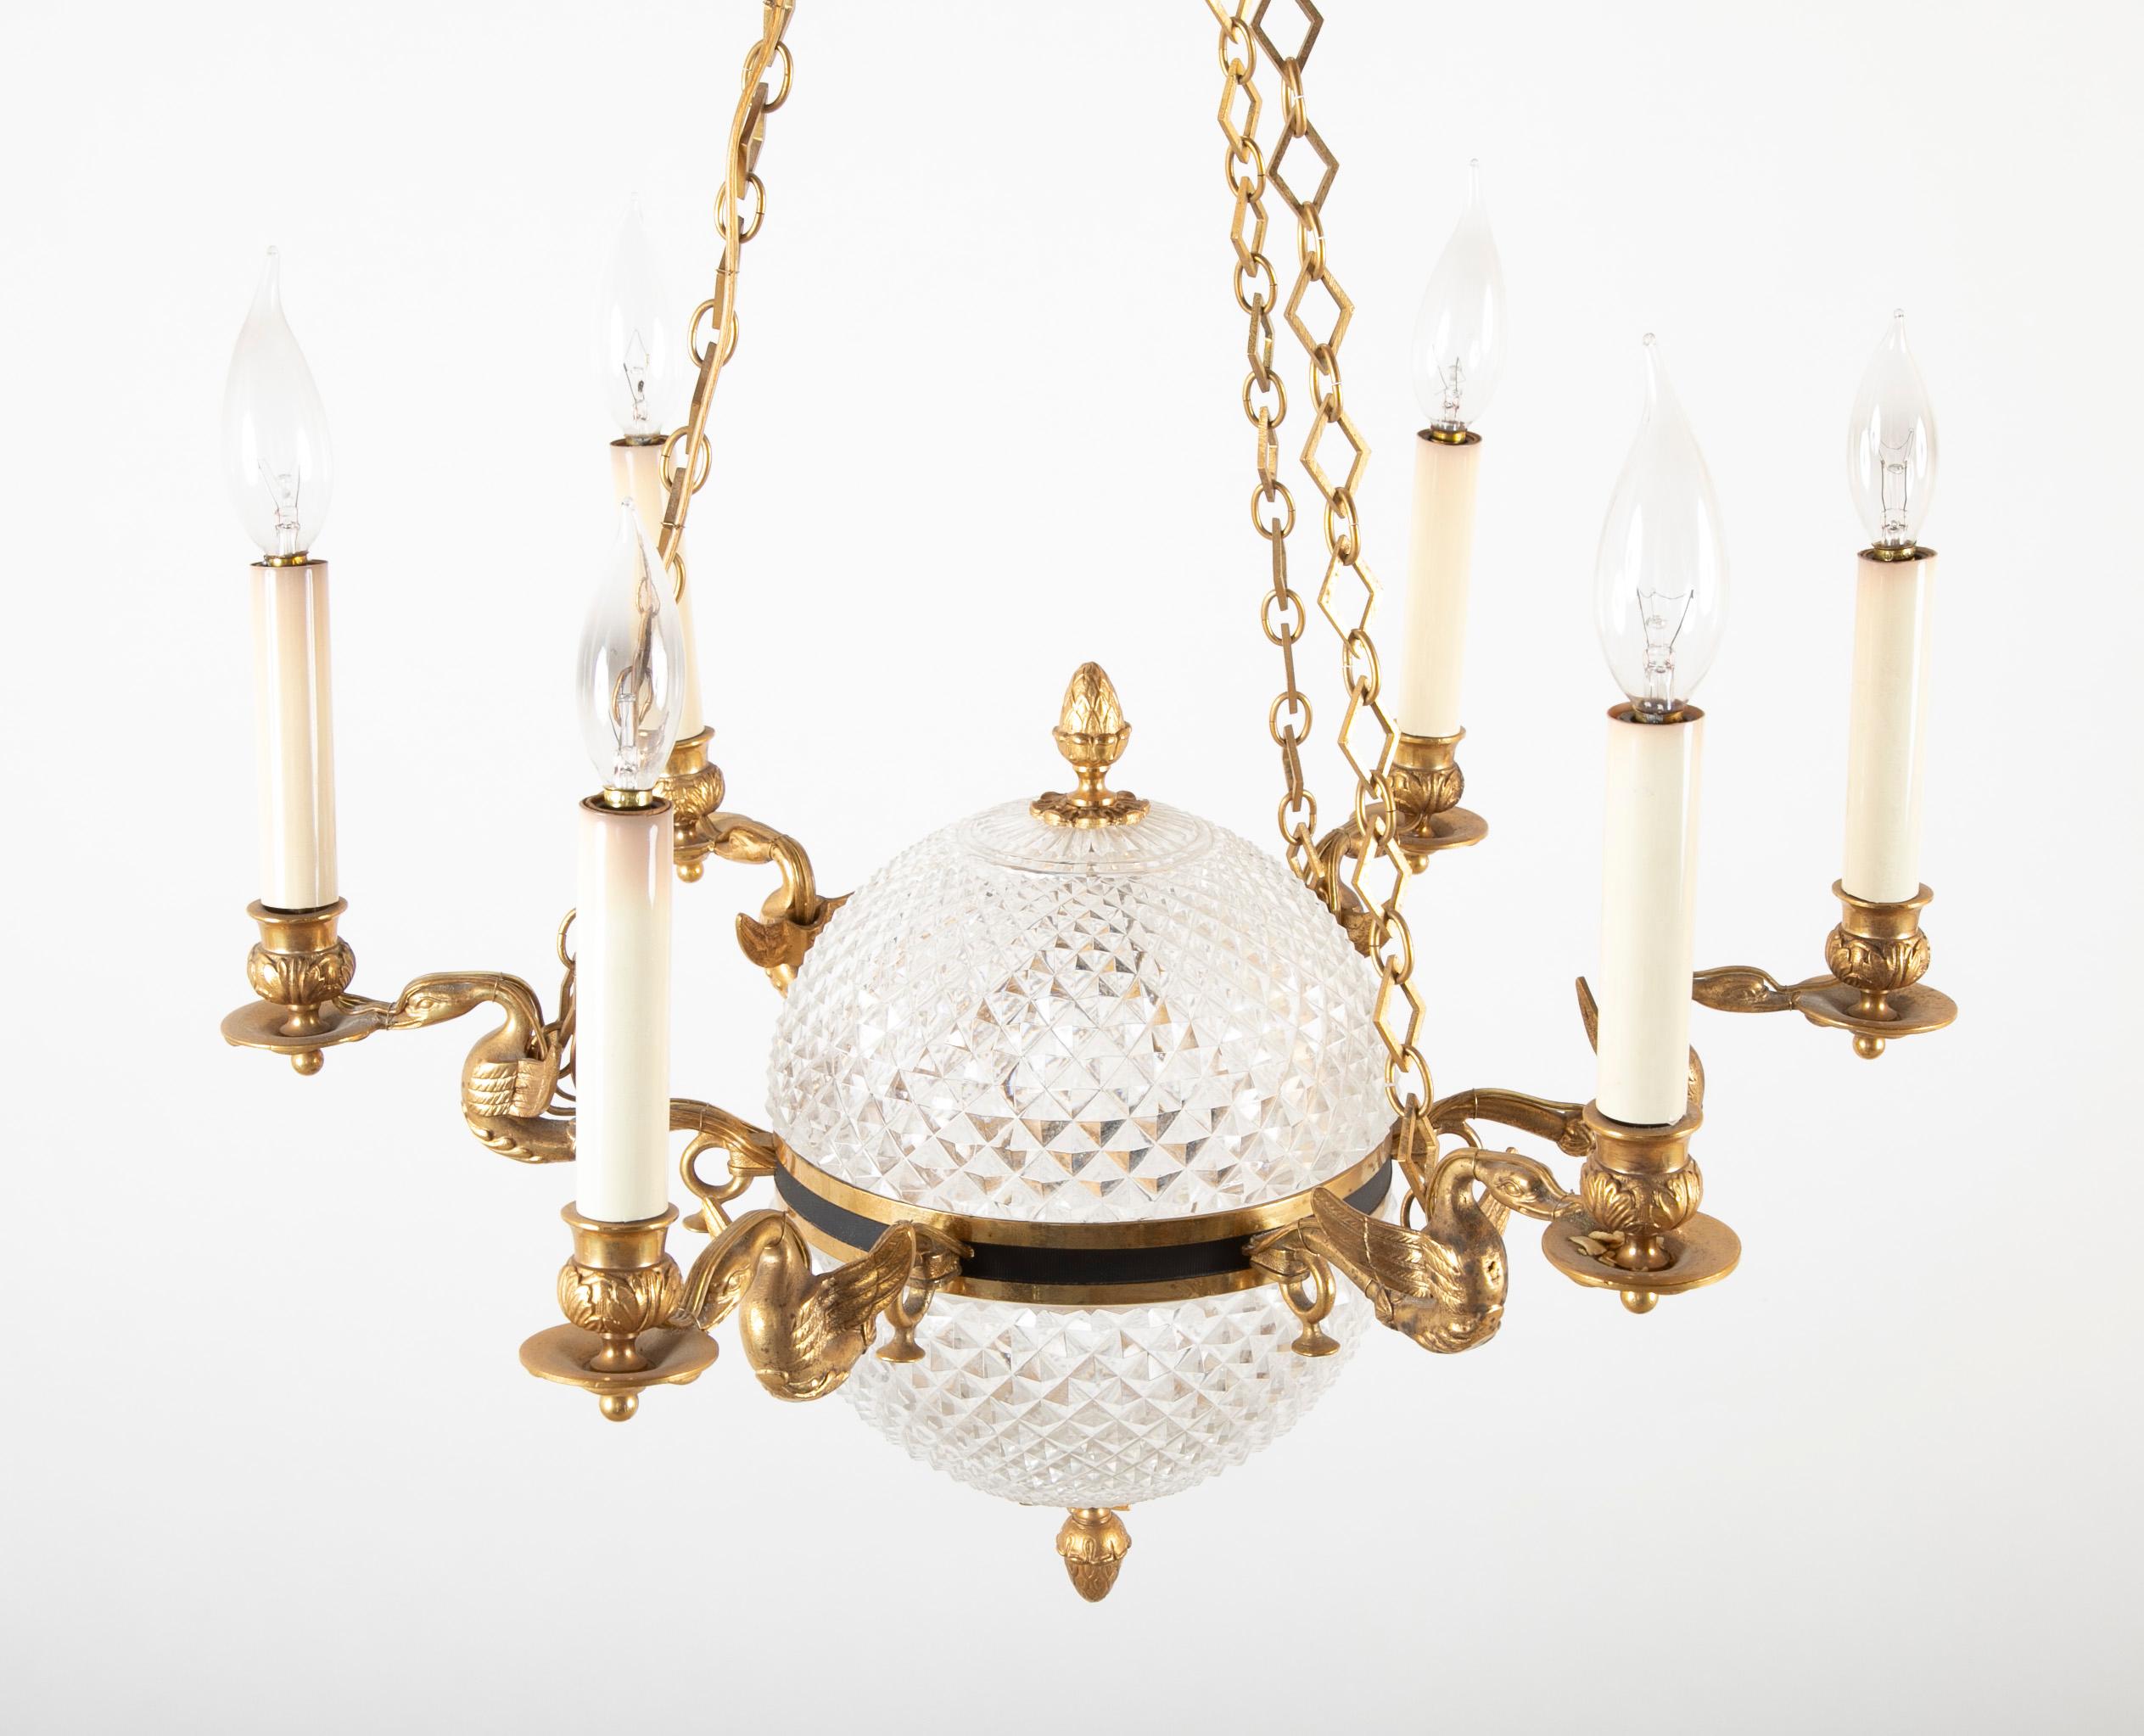 Cut Crystal Chandelier with Central Globe, Swan Arms and Elaborate Crown 7